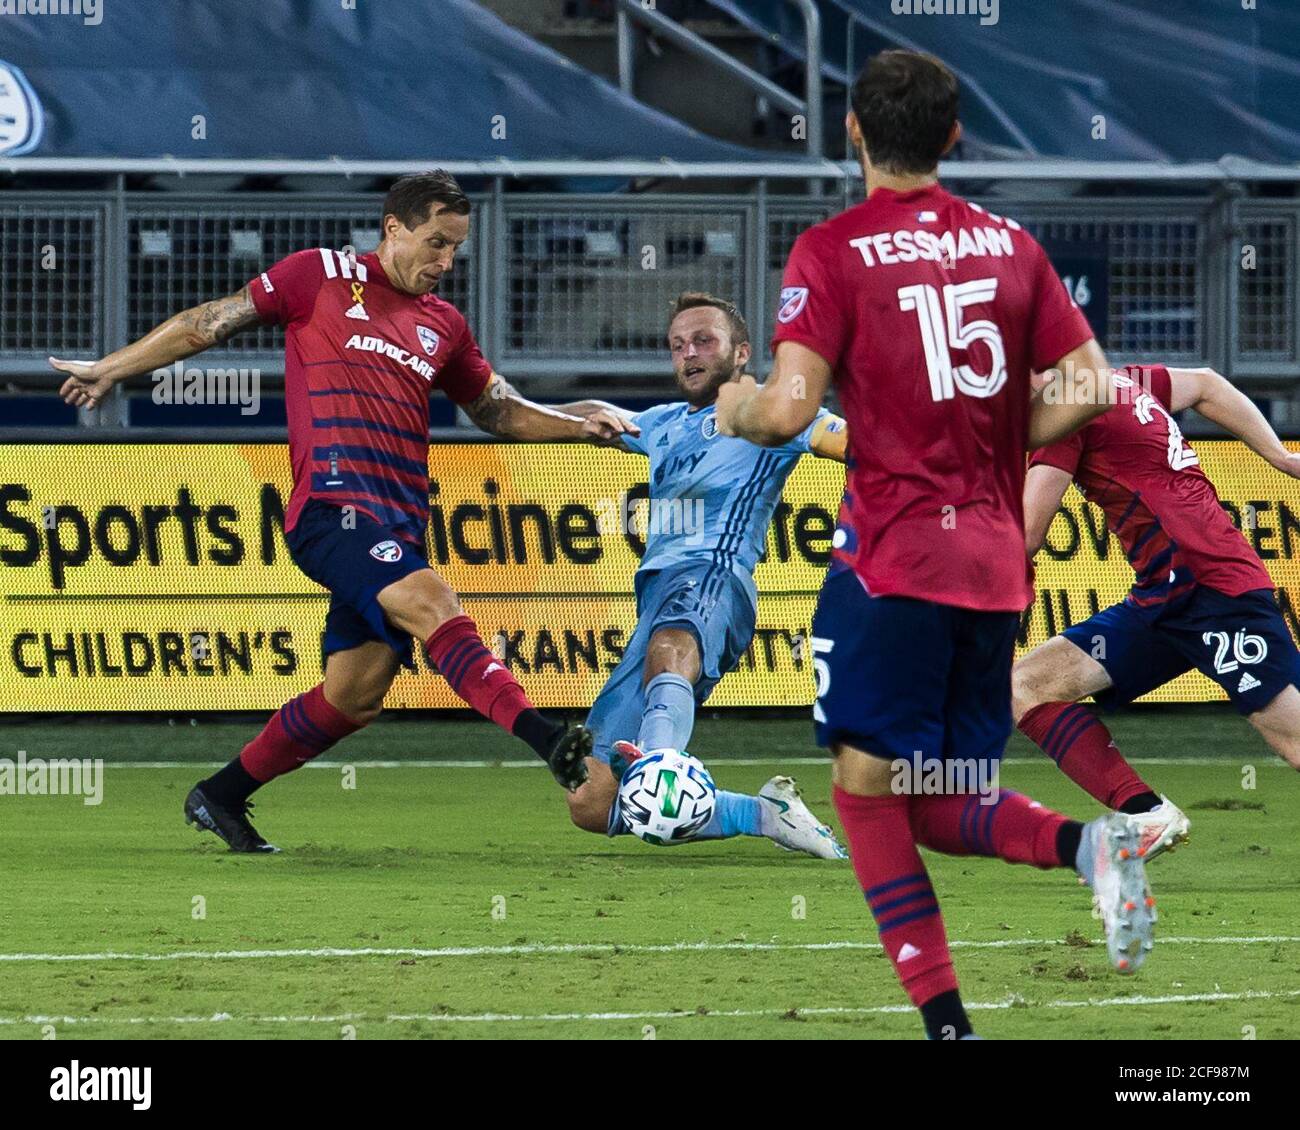 Kansas City, Kansas, USA. 2nd Sep, 2020. Sporting KC forward Johnny Russell #7 (r) makes a defensive tackle against FC Dallas defender Reto Ziegler #3 (l) during the first half of the game. Credit: Serena S.Y. Hsu/ZUMA Wire/Alamy Live News Stock Photo